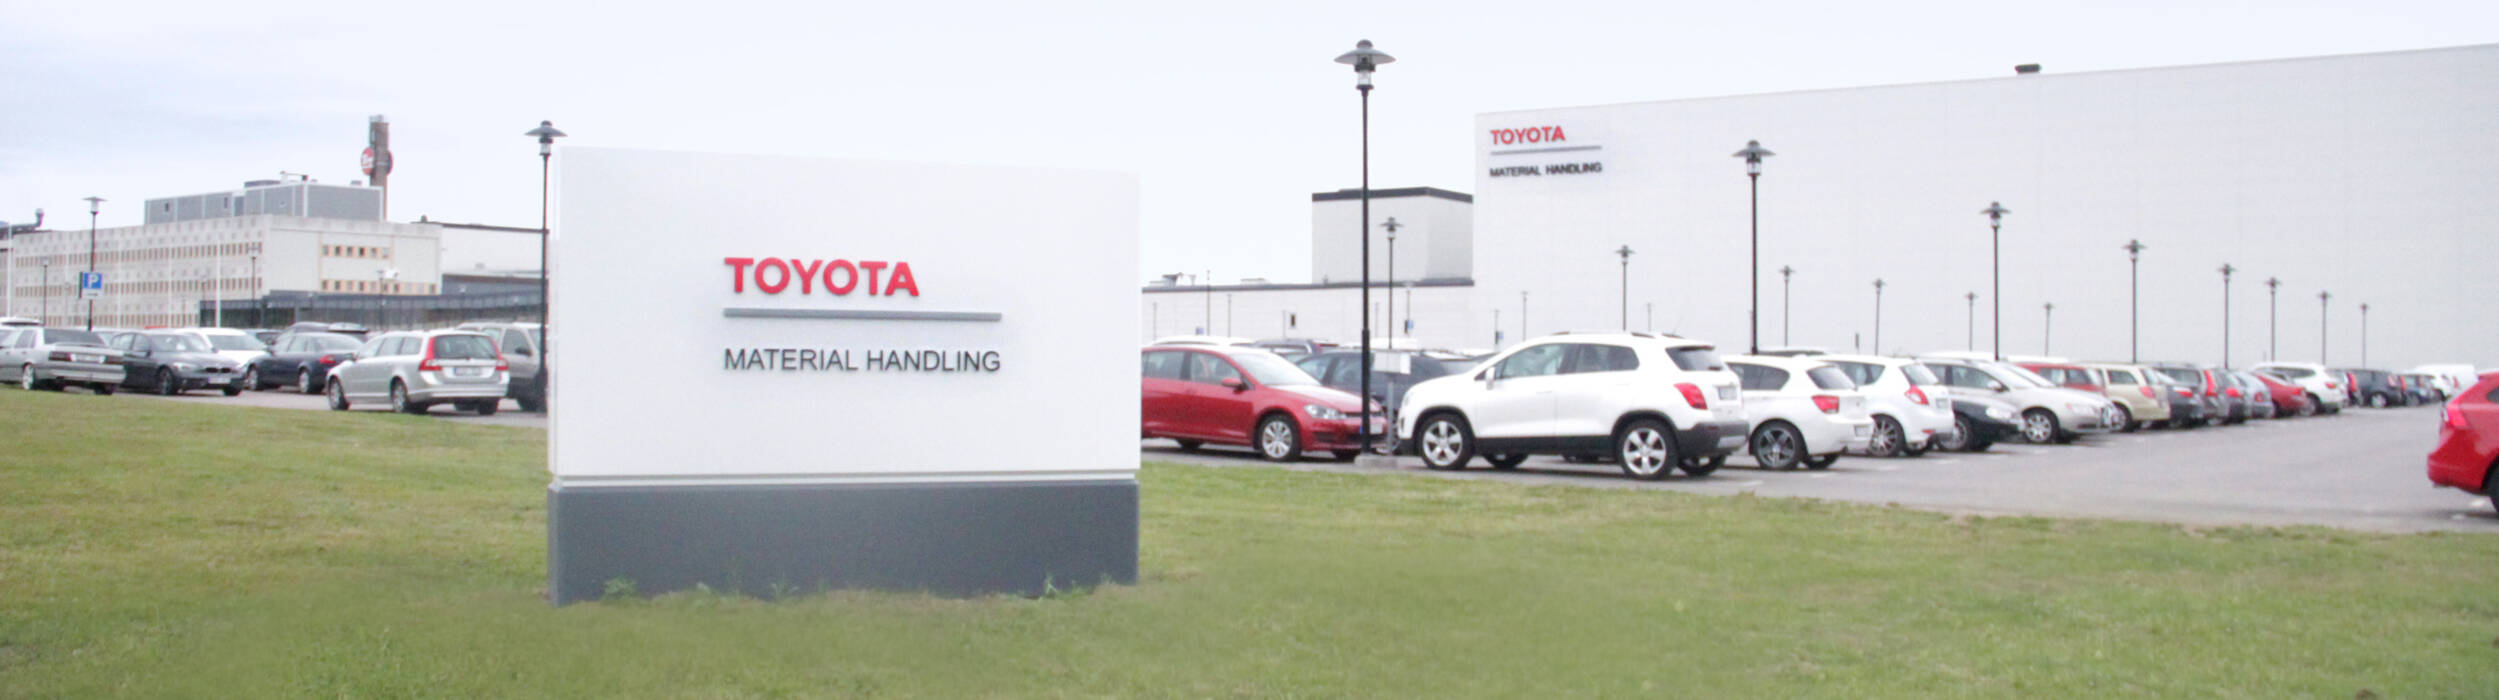 Sign for Toyota Material Handling